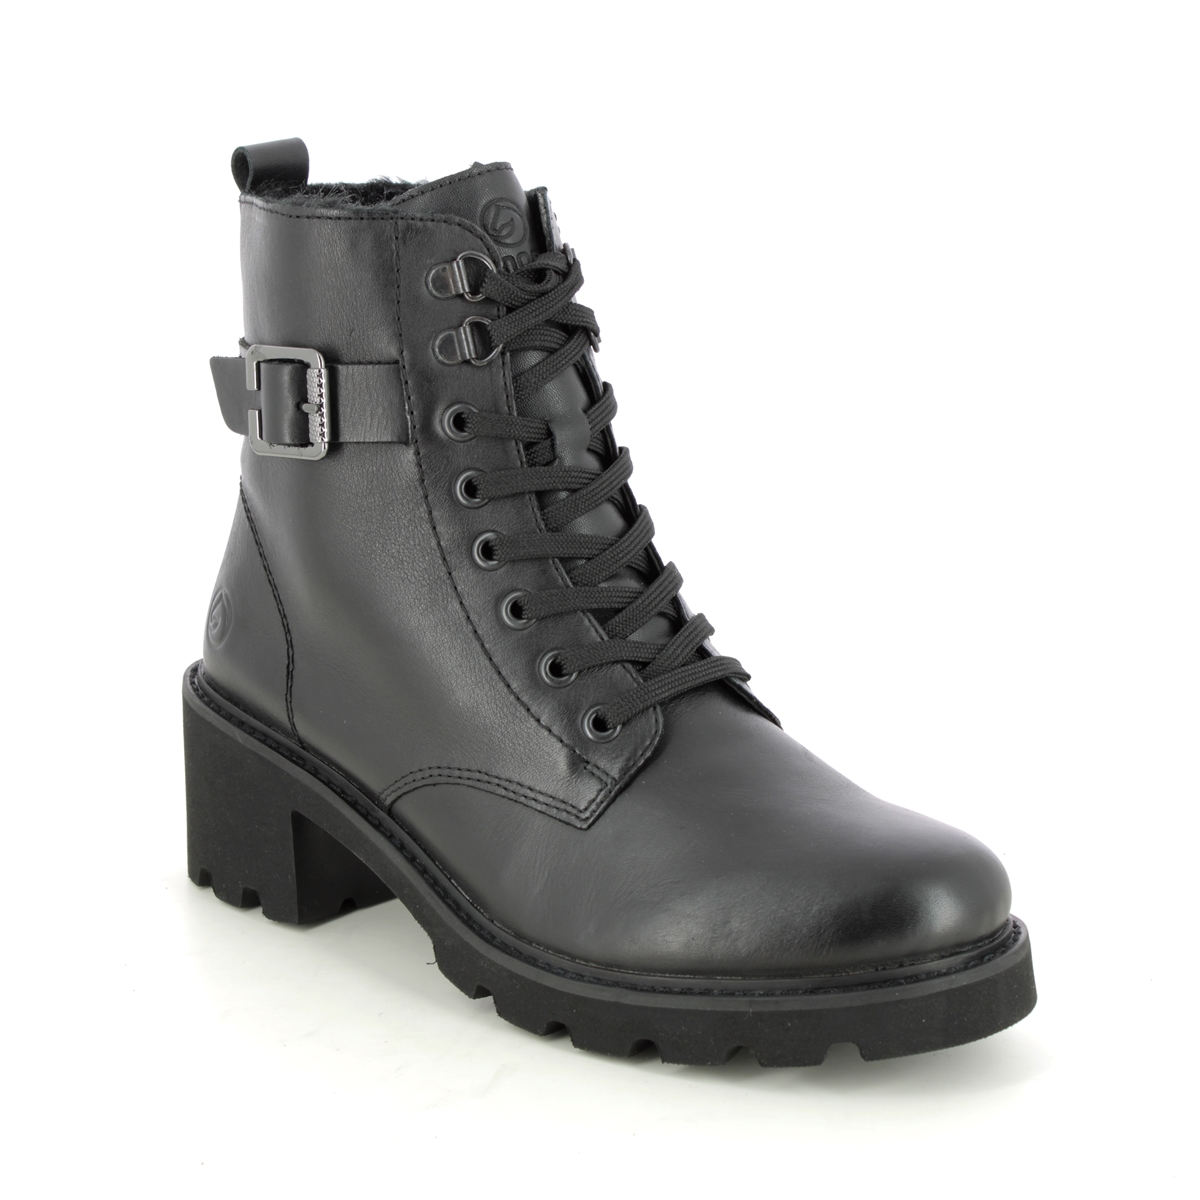 Remonte D0A74-01 Bodola Black leather Womens Lace Up Boots in a Plain Leather in Size 37